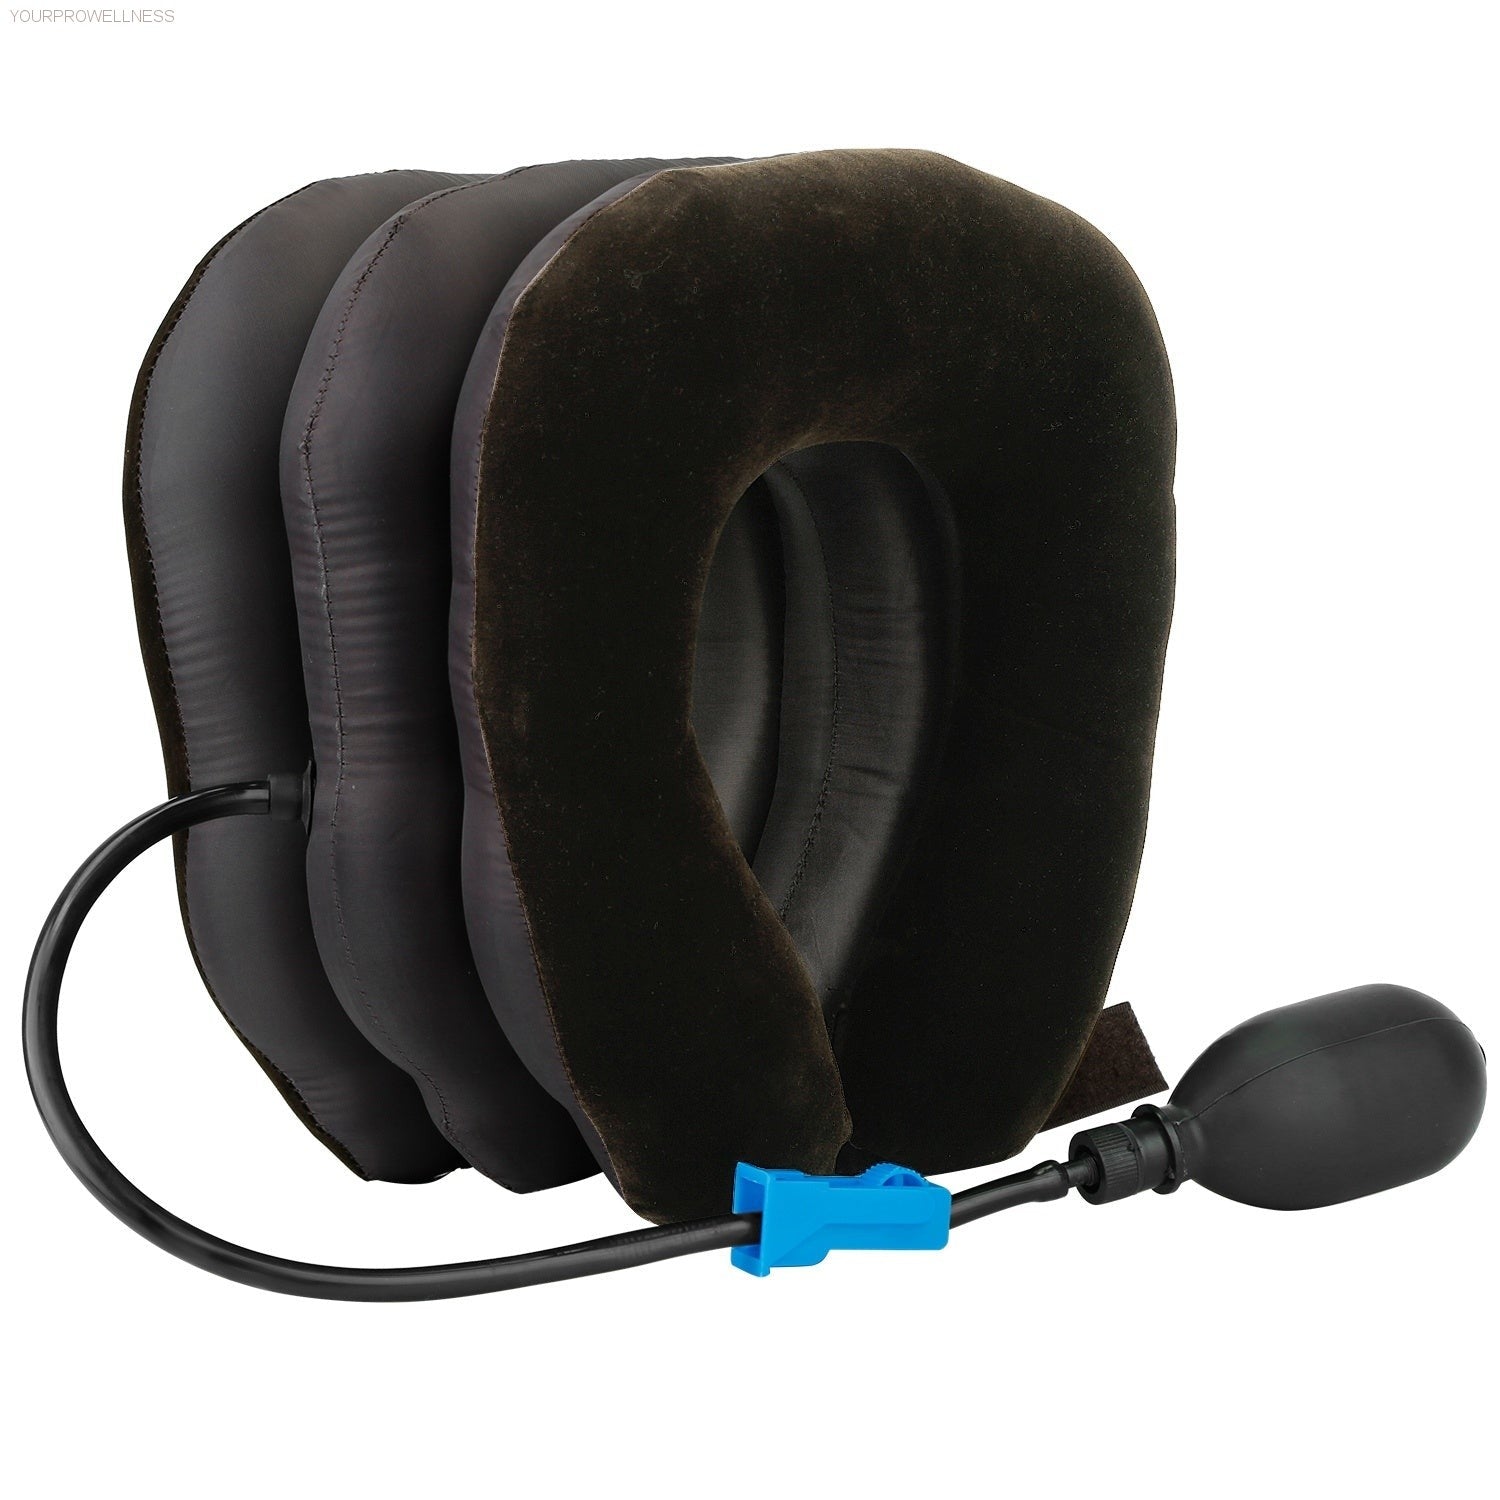 Inflatable Cervical Neck Traction Pillow-YOURPROWELLNESS LLC